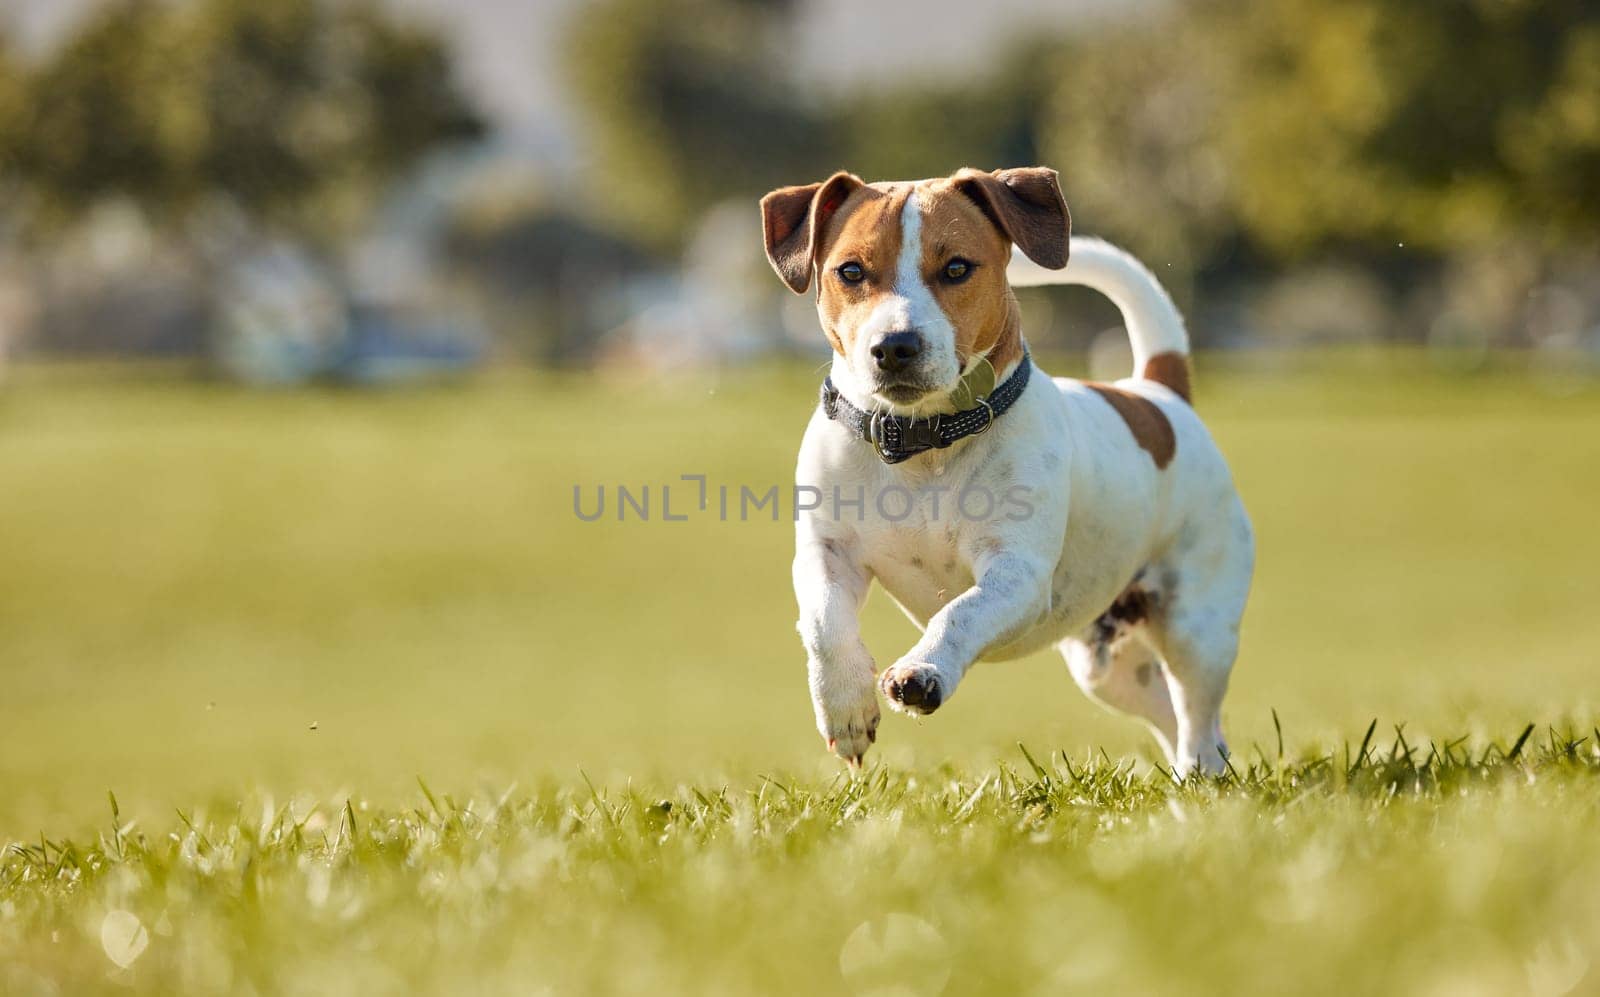 Dog, running and outdoor exercise on field for animal training in summer for healthy development, mobility or wellness. Backyard, workout and nature grass as Jack russell terrier, playing or fitness.